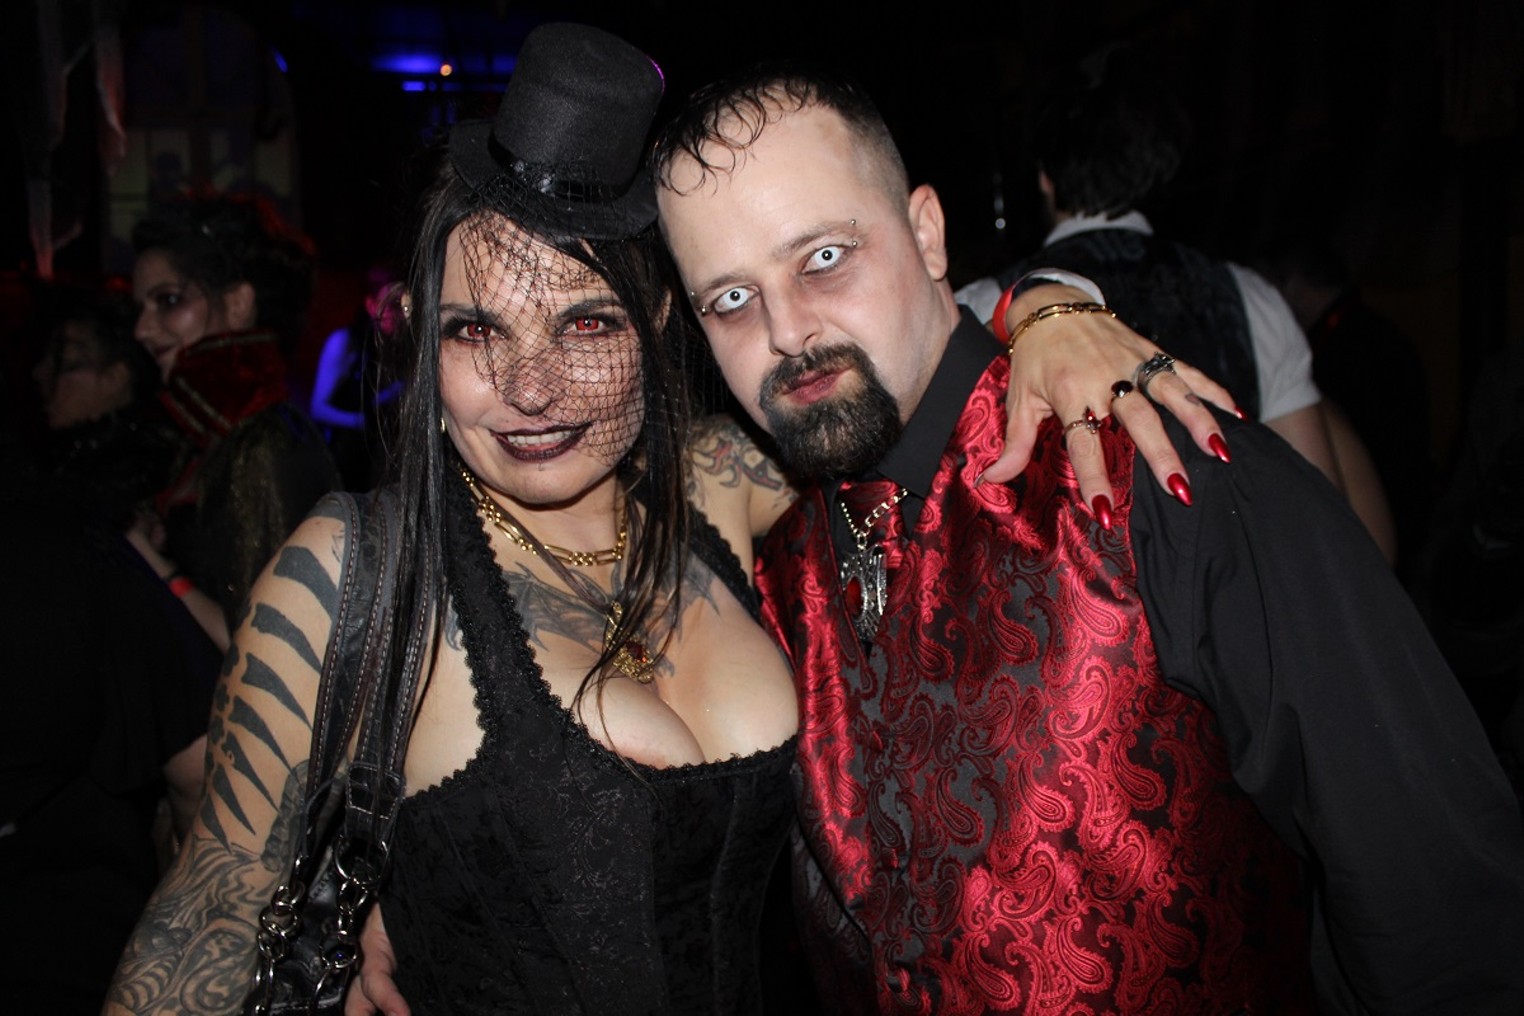 Phoenix's Sexiest Vampires Come out to Play at Vampire Ball., Phoenix, Phoenix New Times